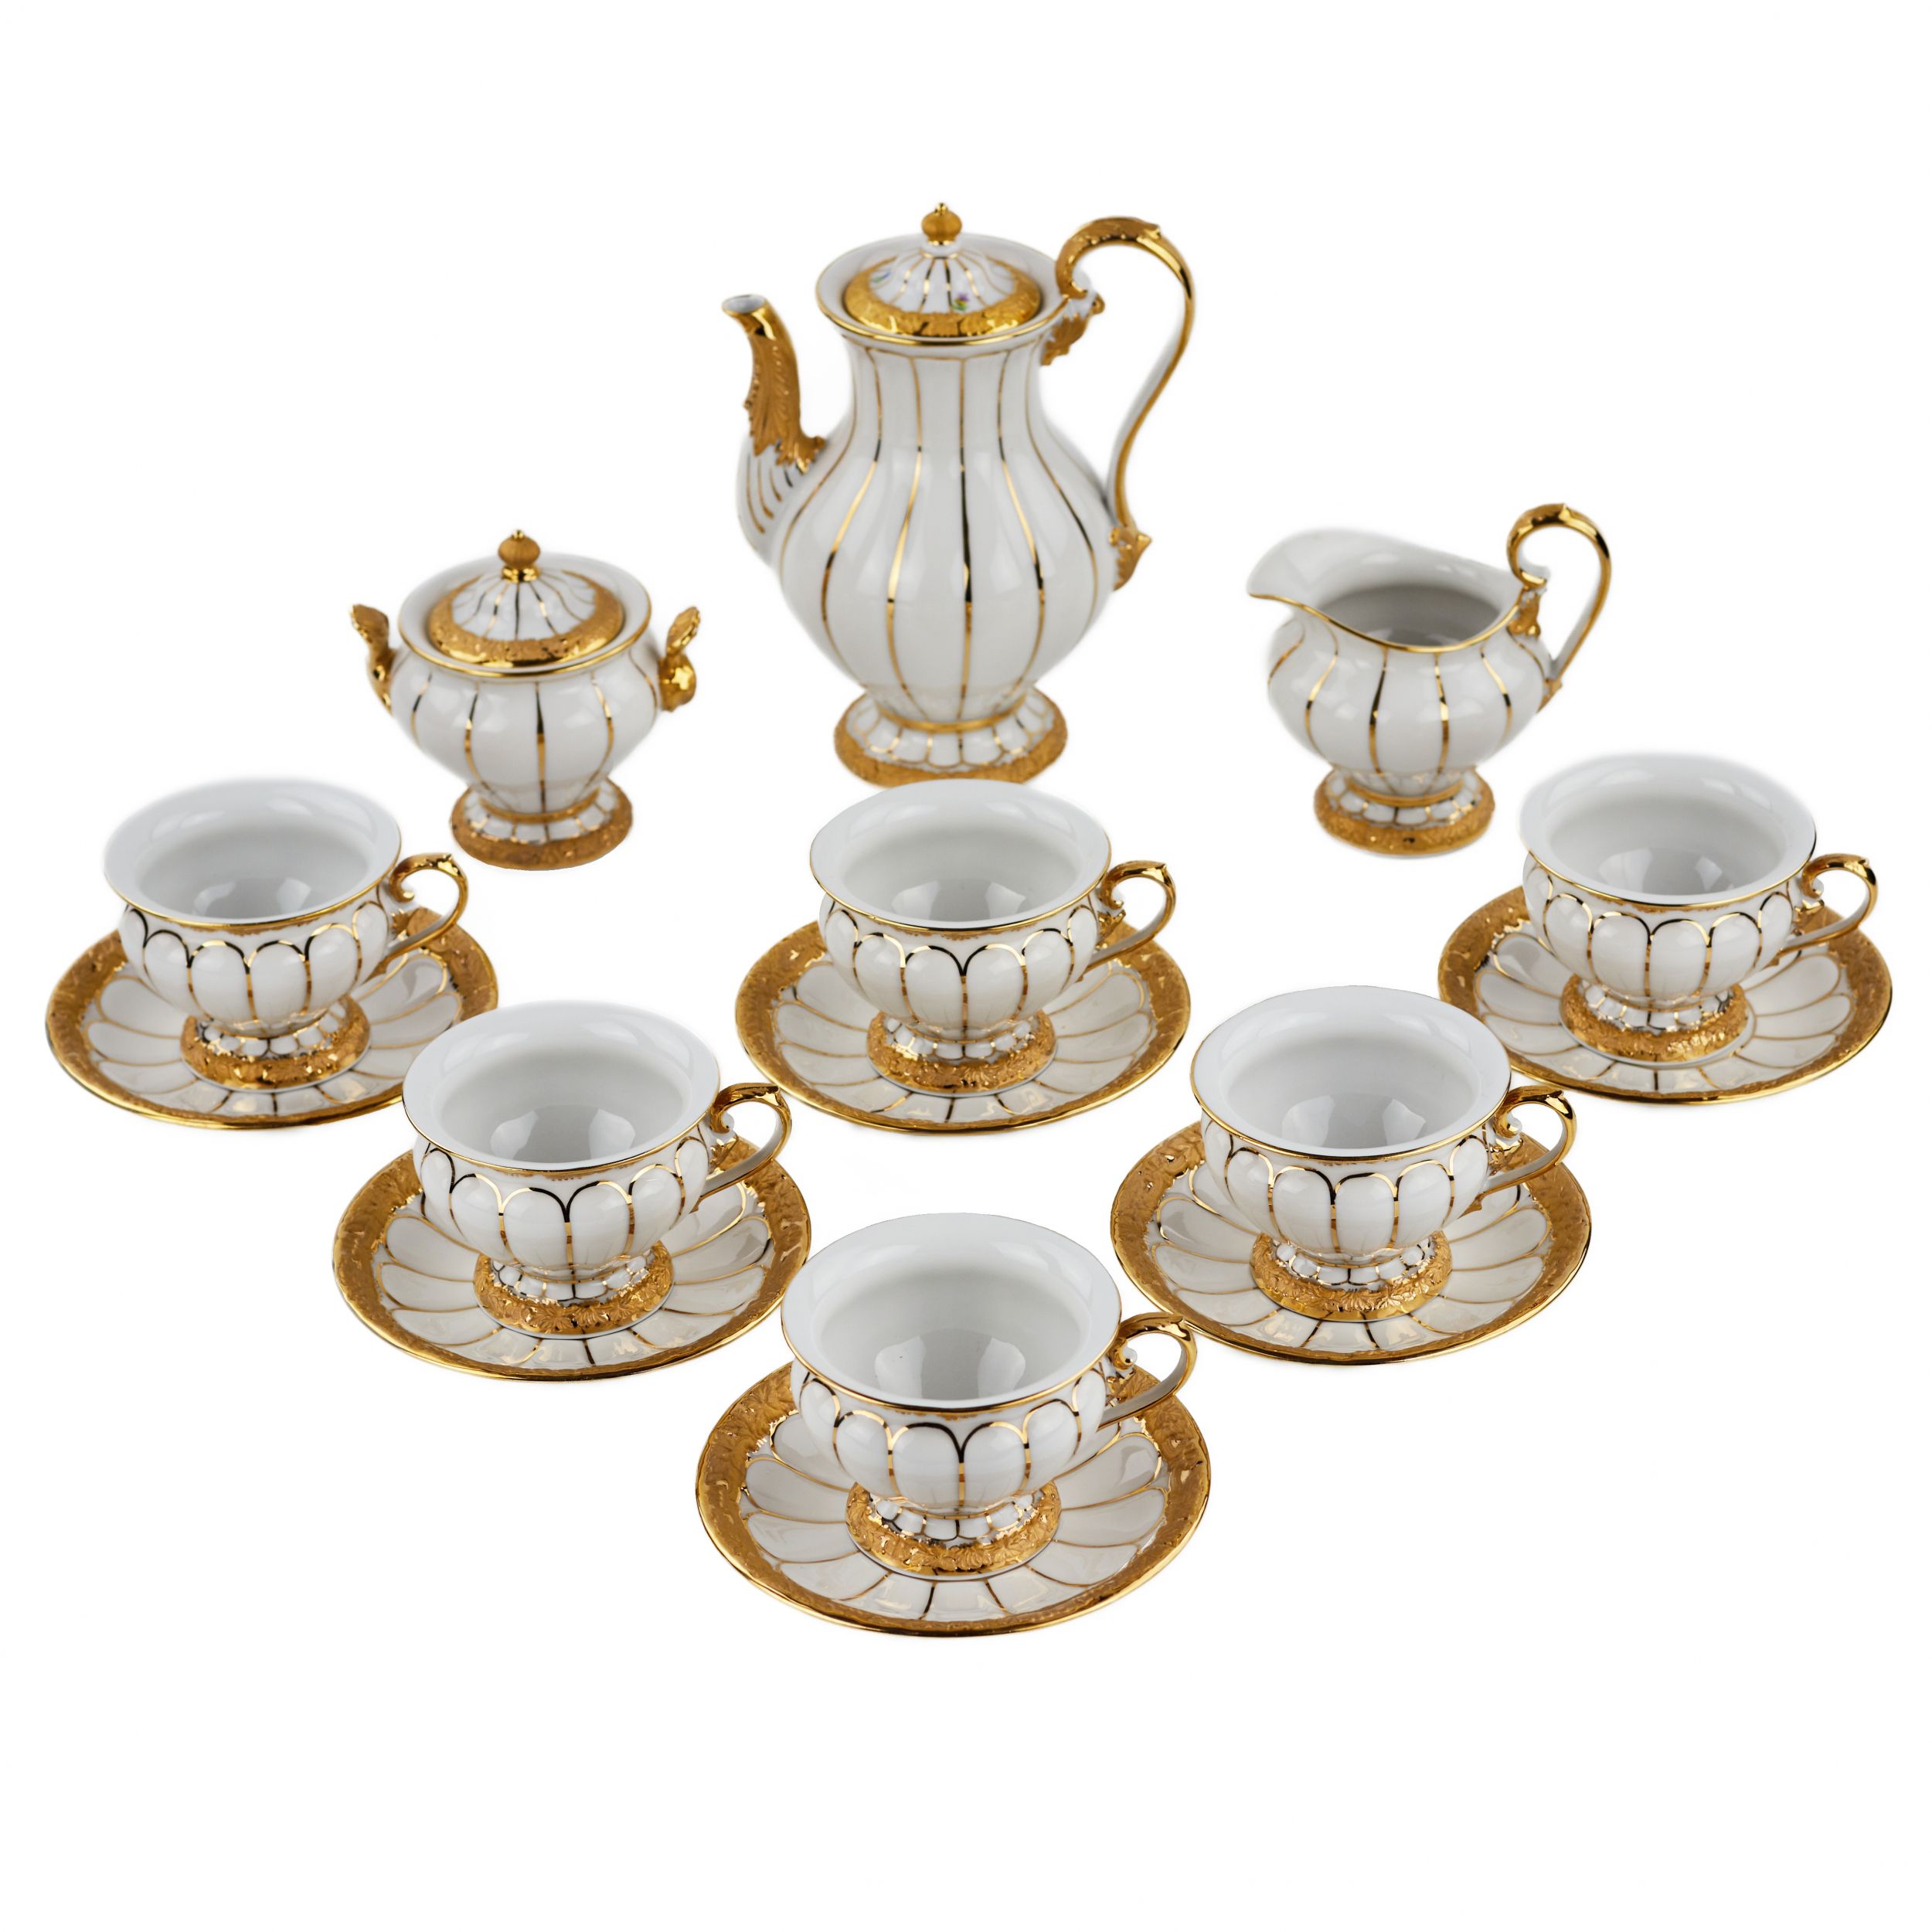 White-and-gilded-porcelain-mocha-coffee-service-for-six-people-Meissen-